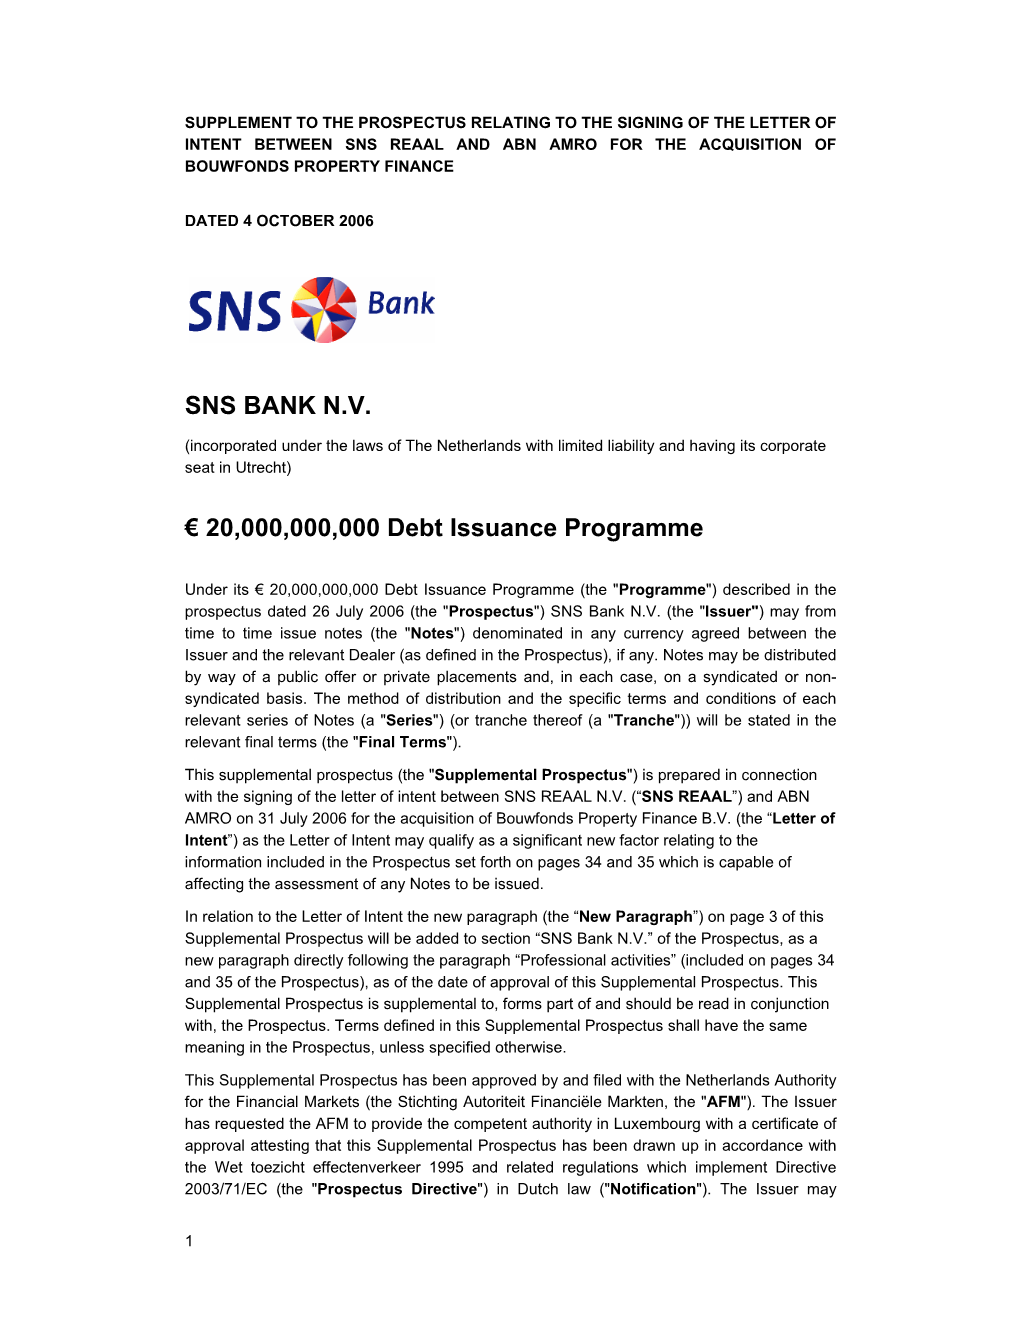 SNS BANK NV € 20000000000 Debt Issuance